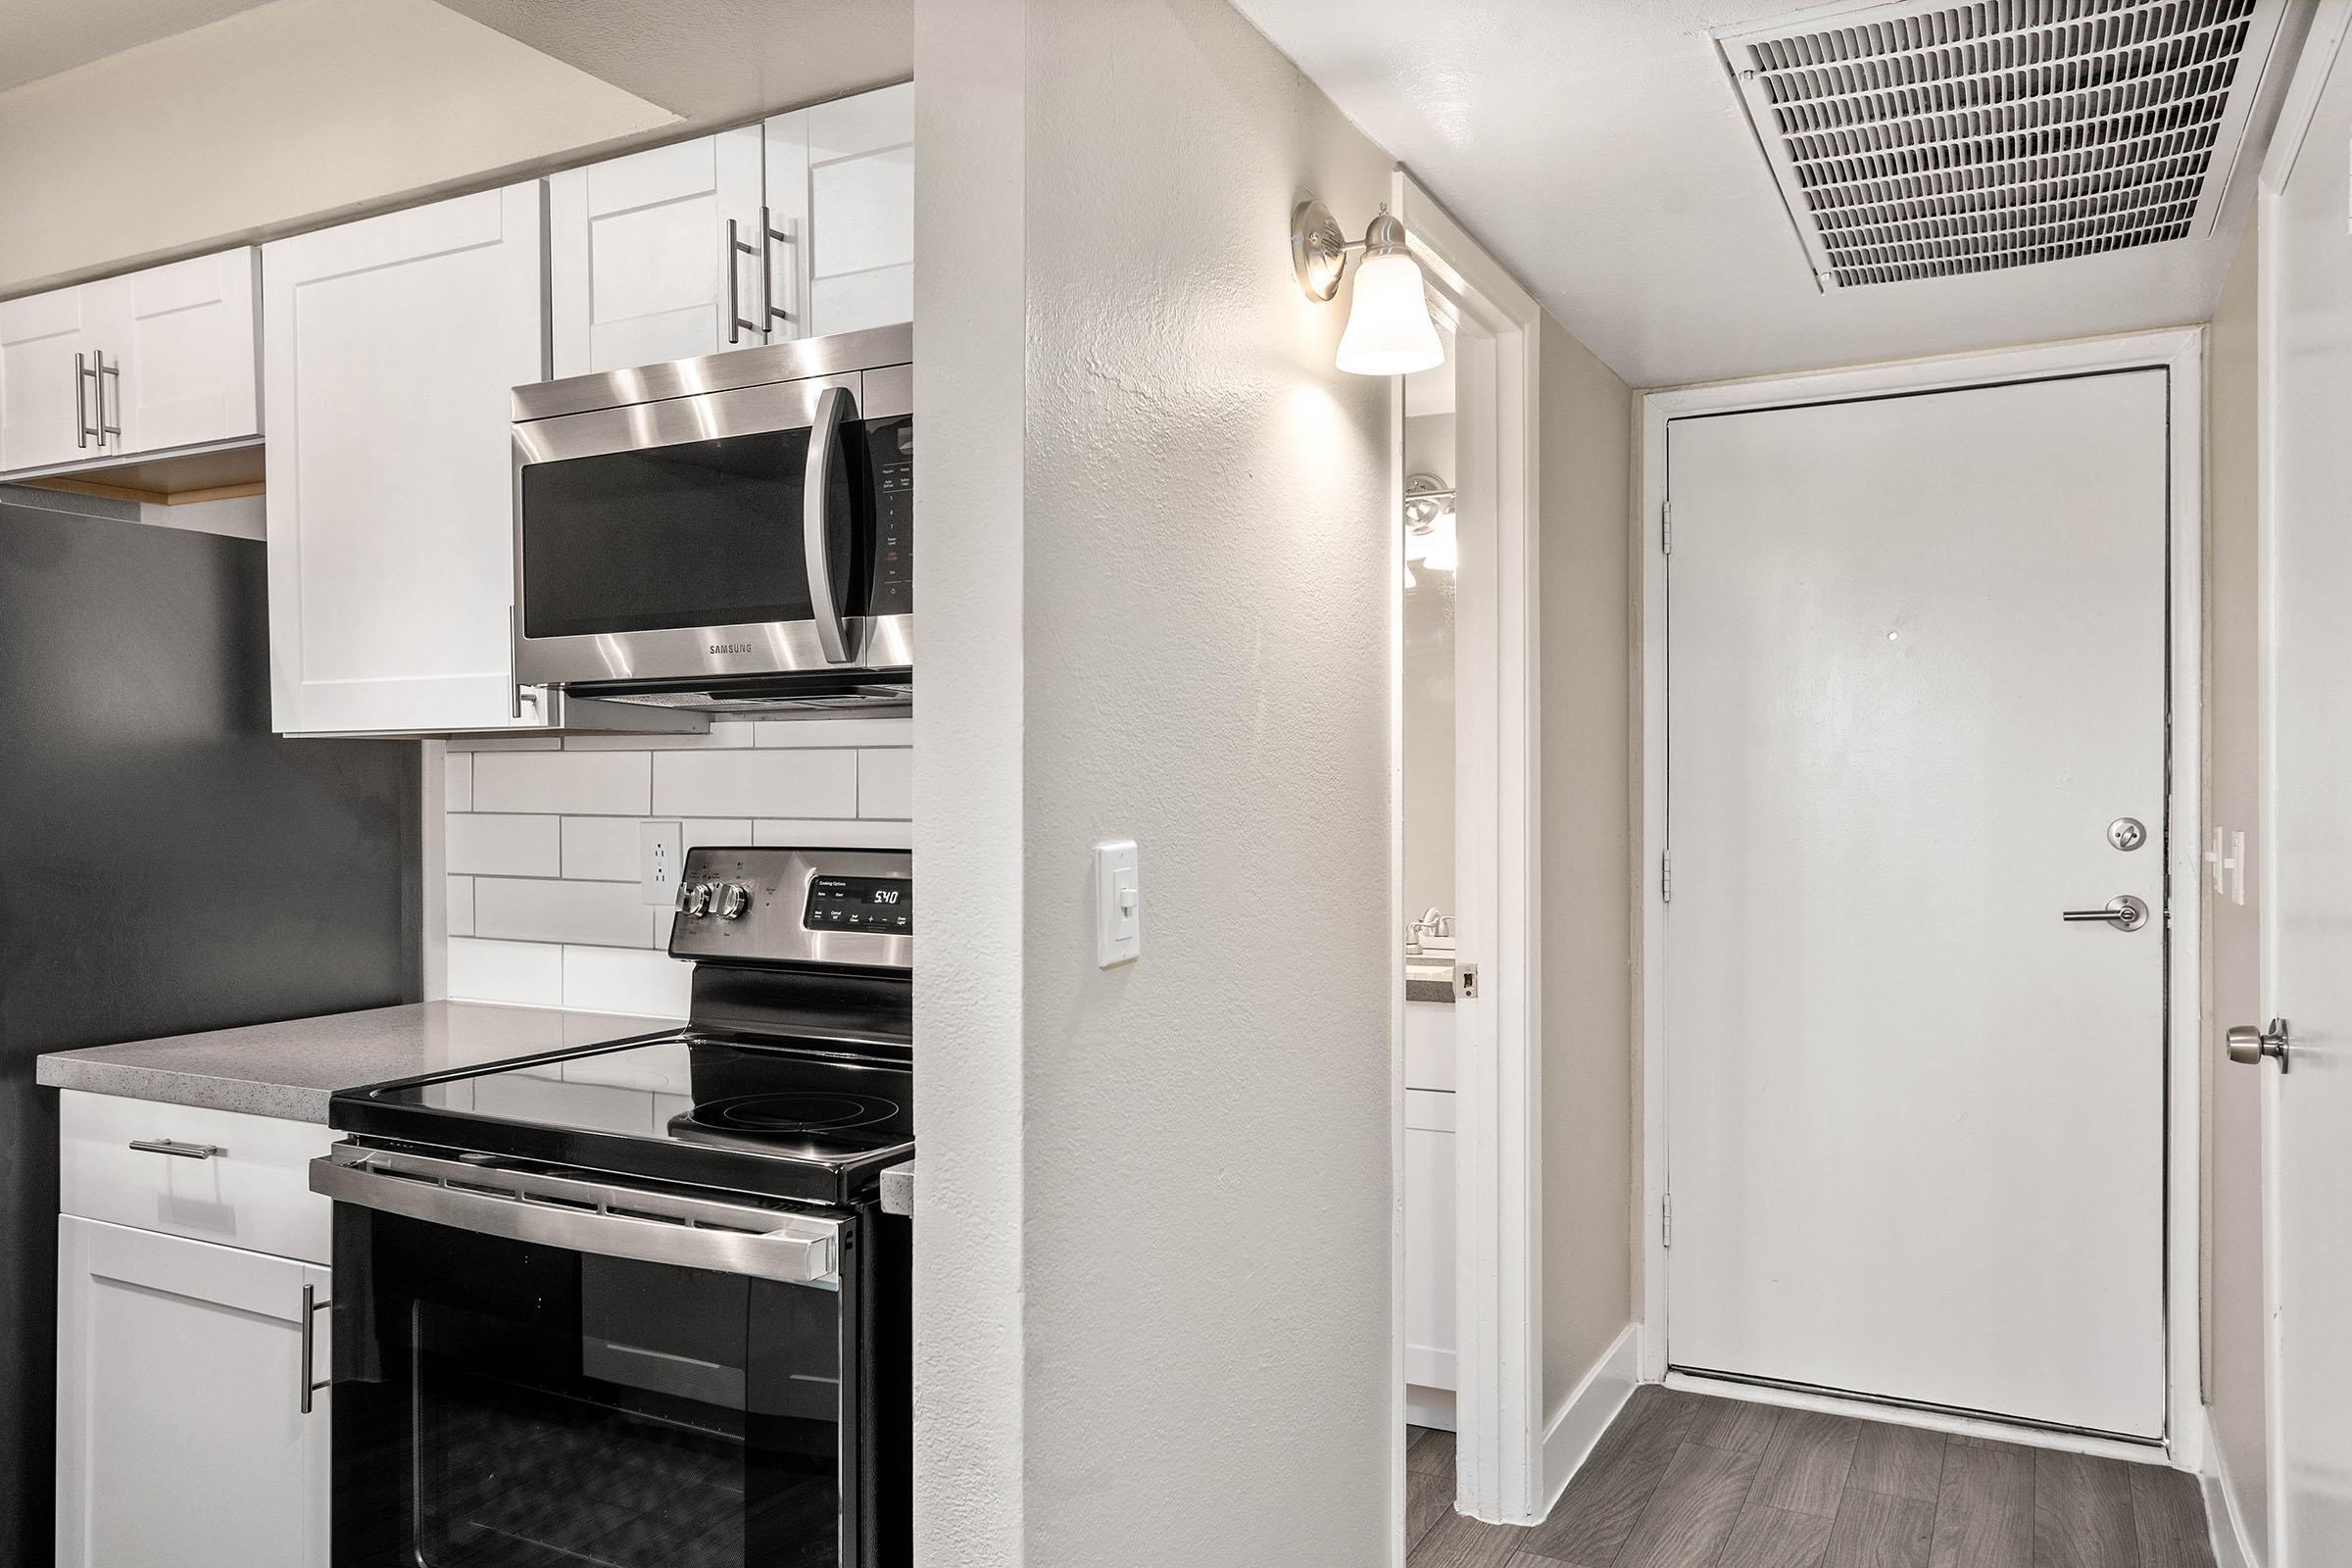 Studio apartment entryway next to a bathroom and a renovated kitchen